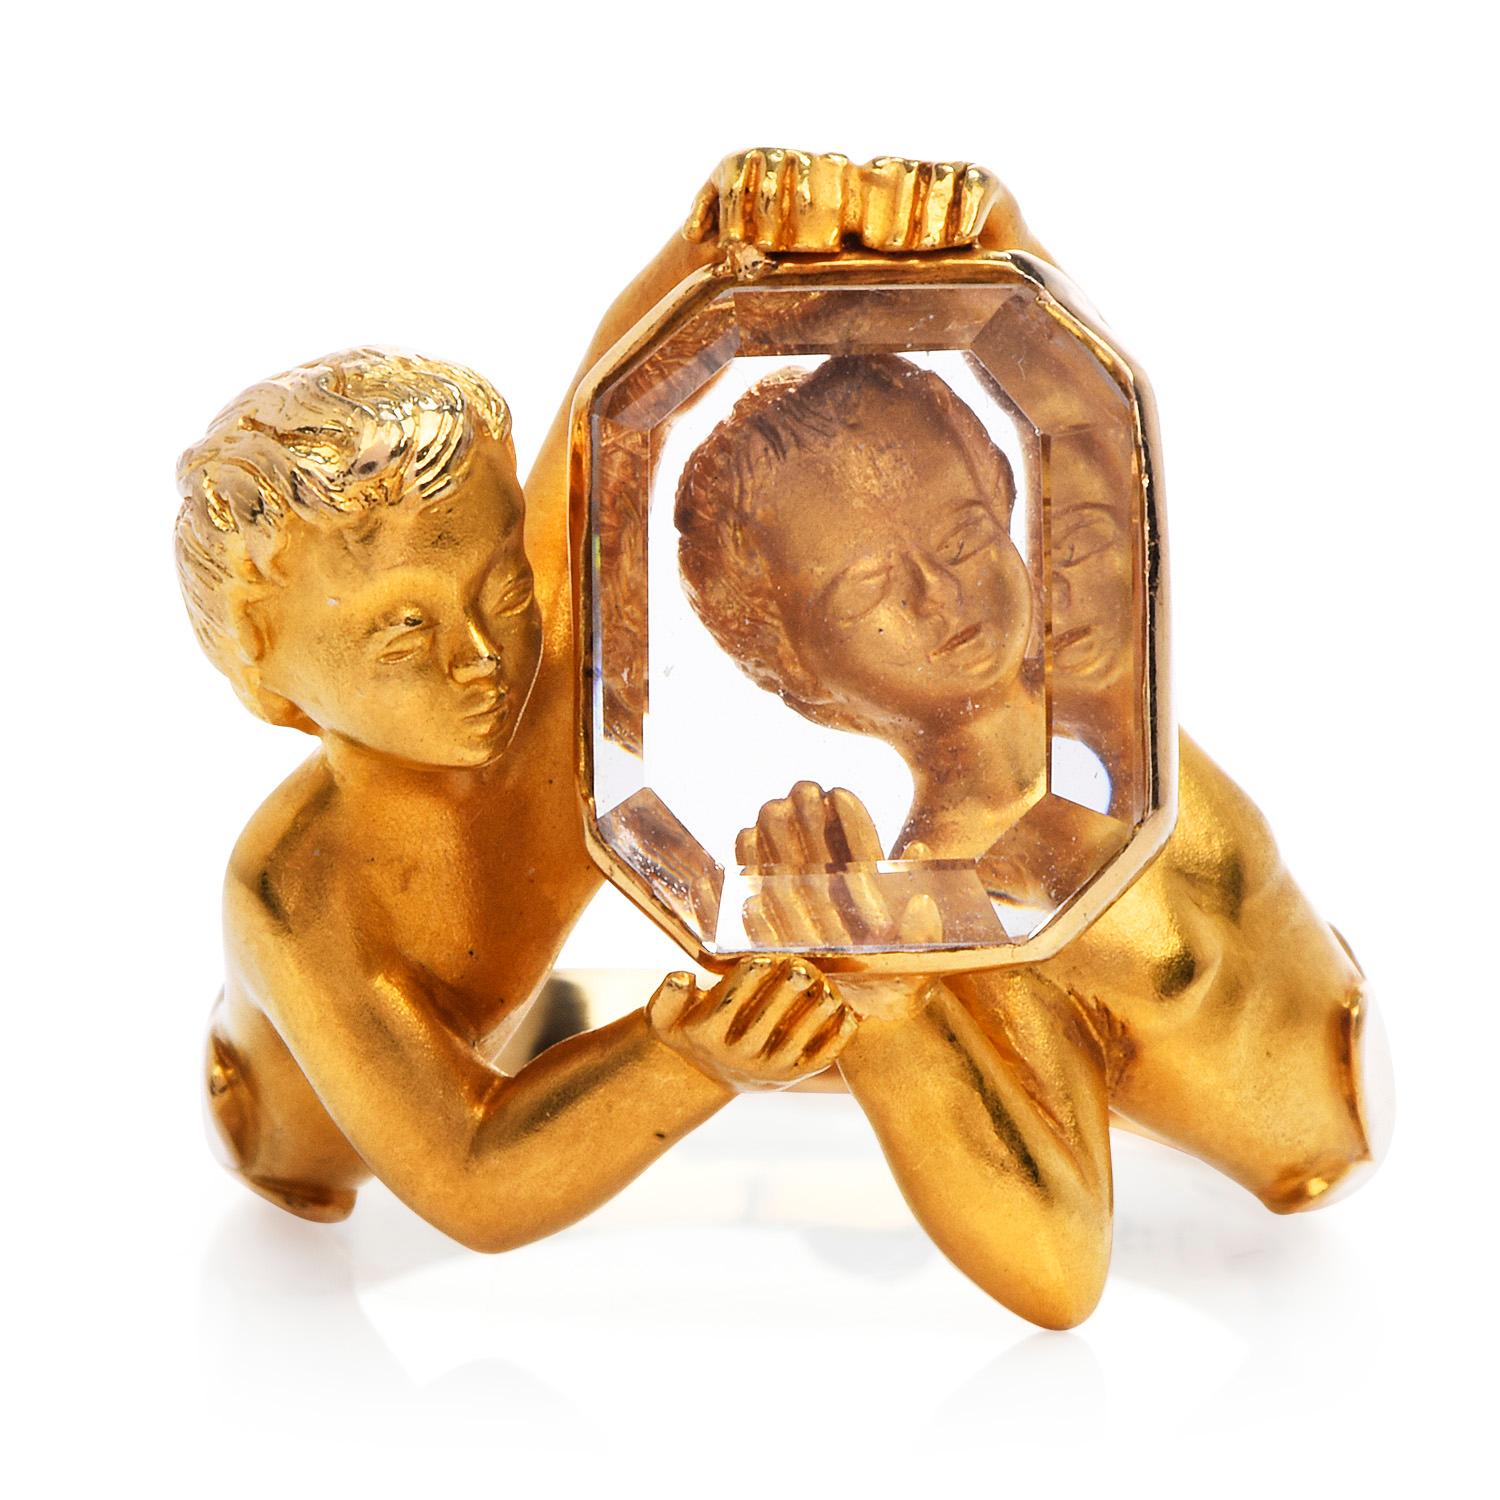 Exquisite highly collectible Carrara Y Carrera Narcissus-inspired ring.

Crafted in solid 18K yellow gold with a satin finish.

Presents two young figurines representing the greek mythology 